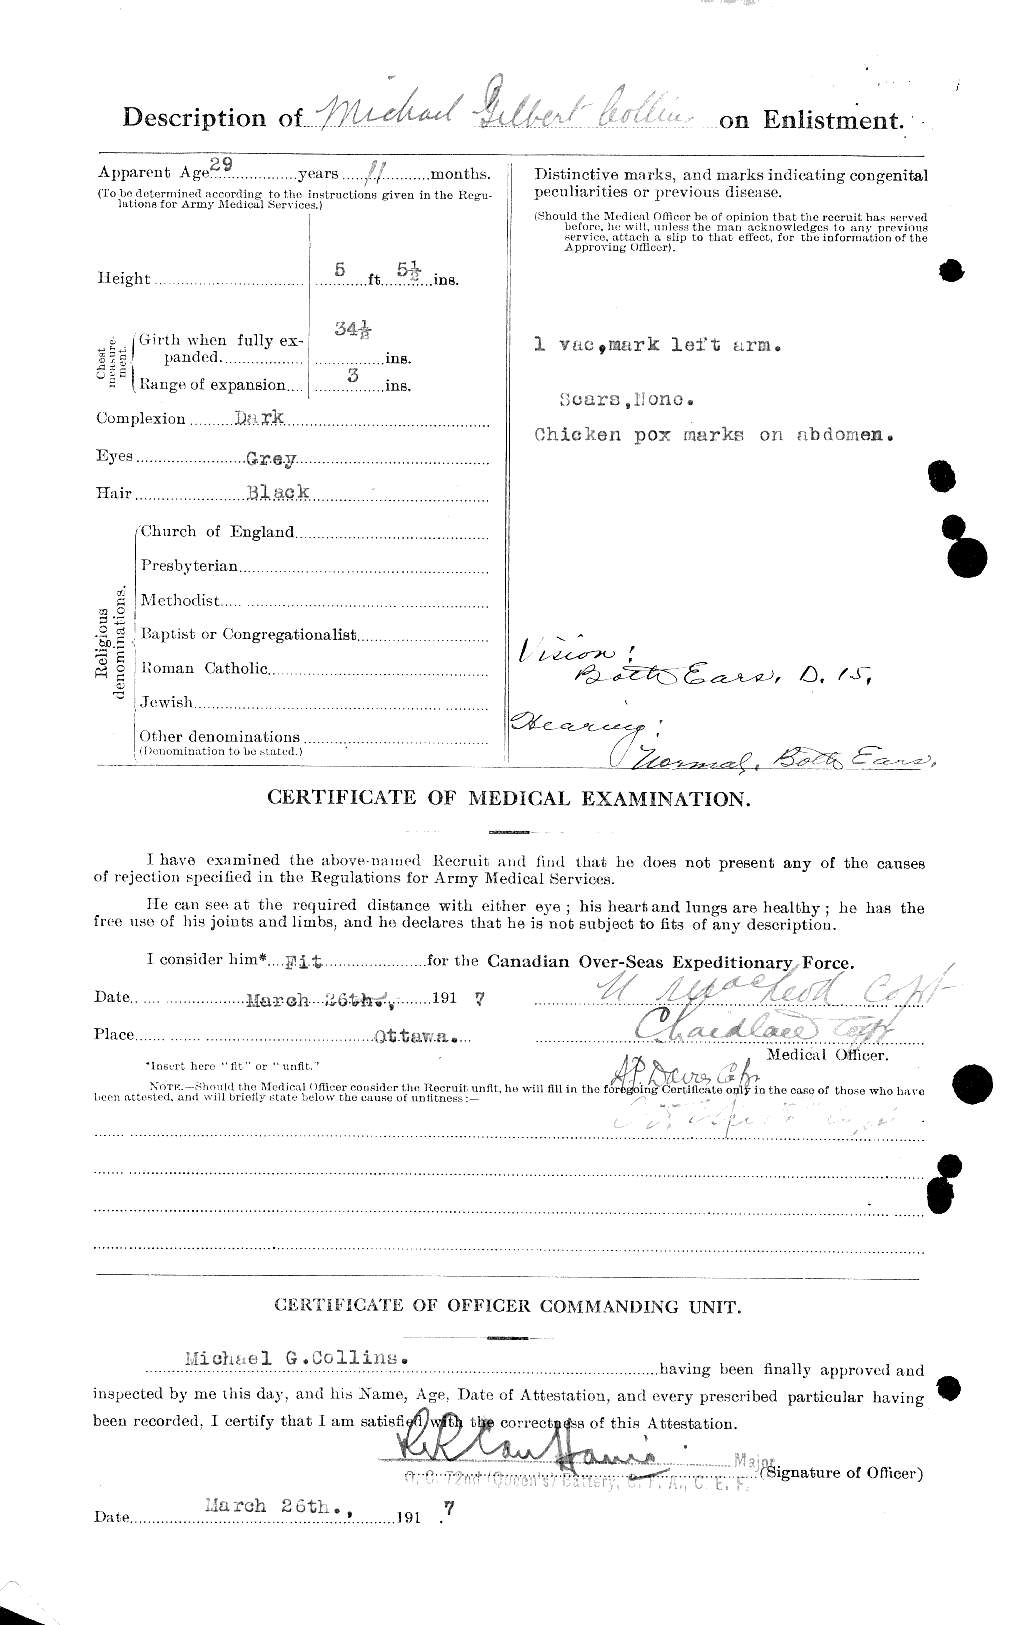 Personnel Records of the First World War - CEF 034470b